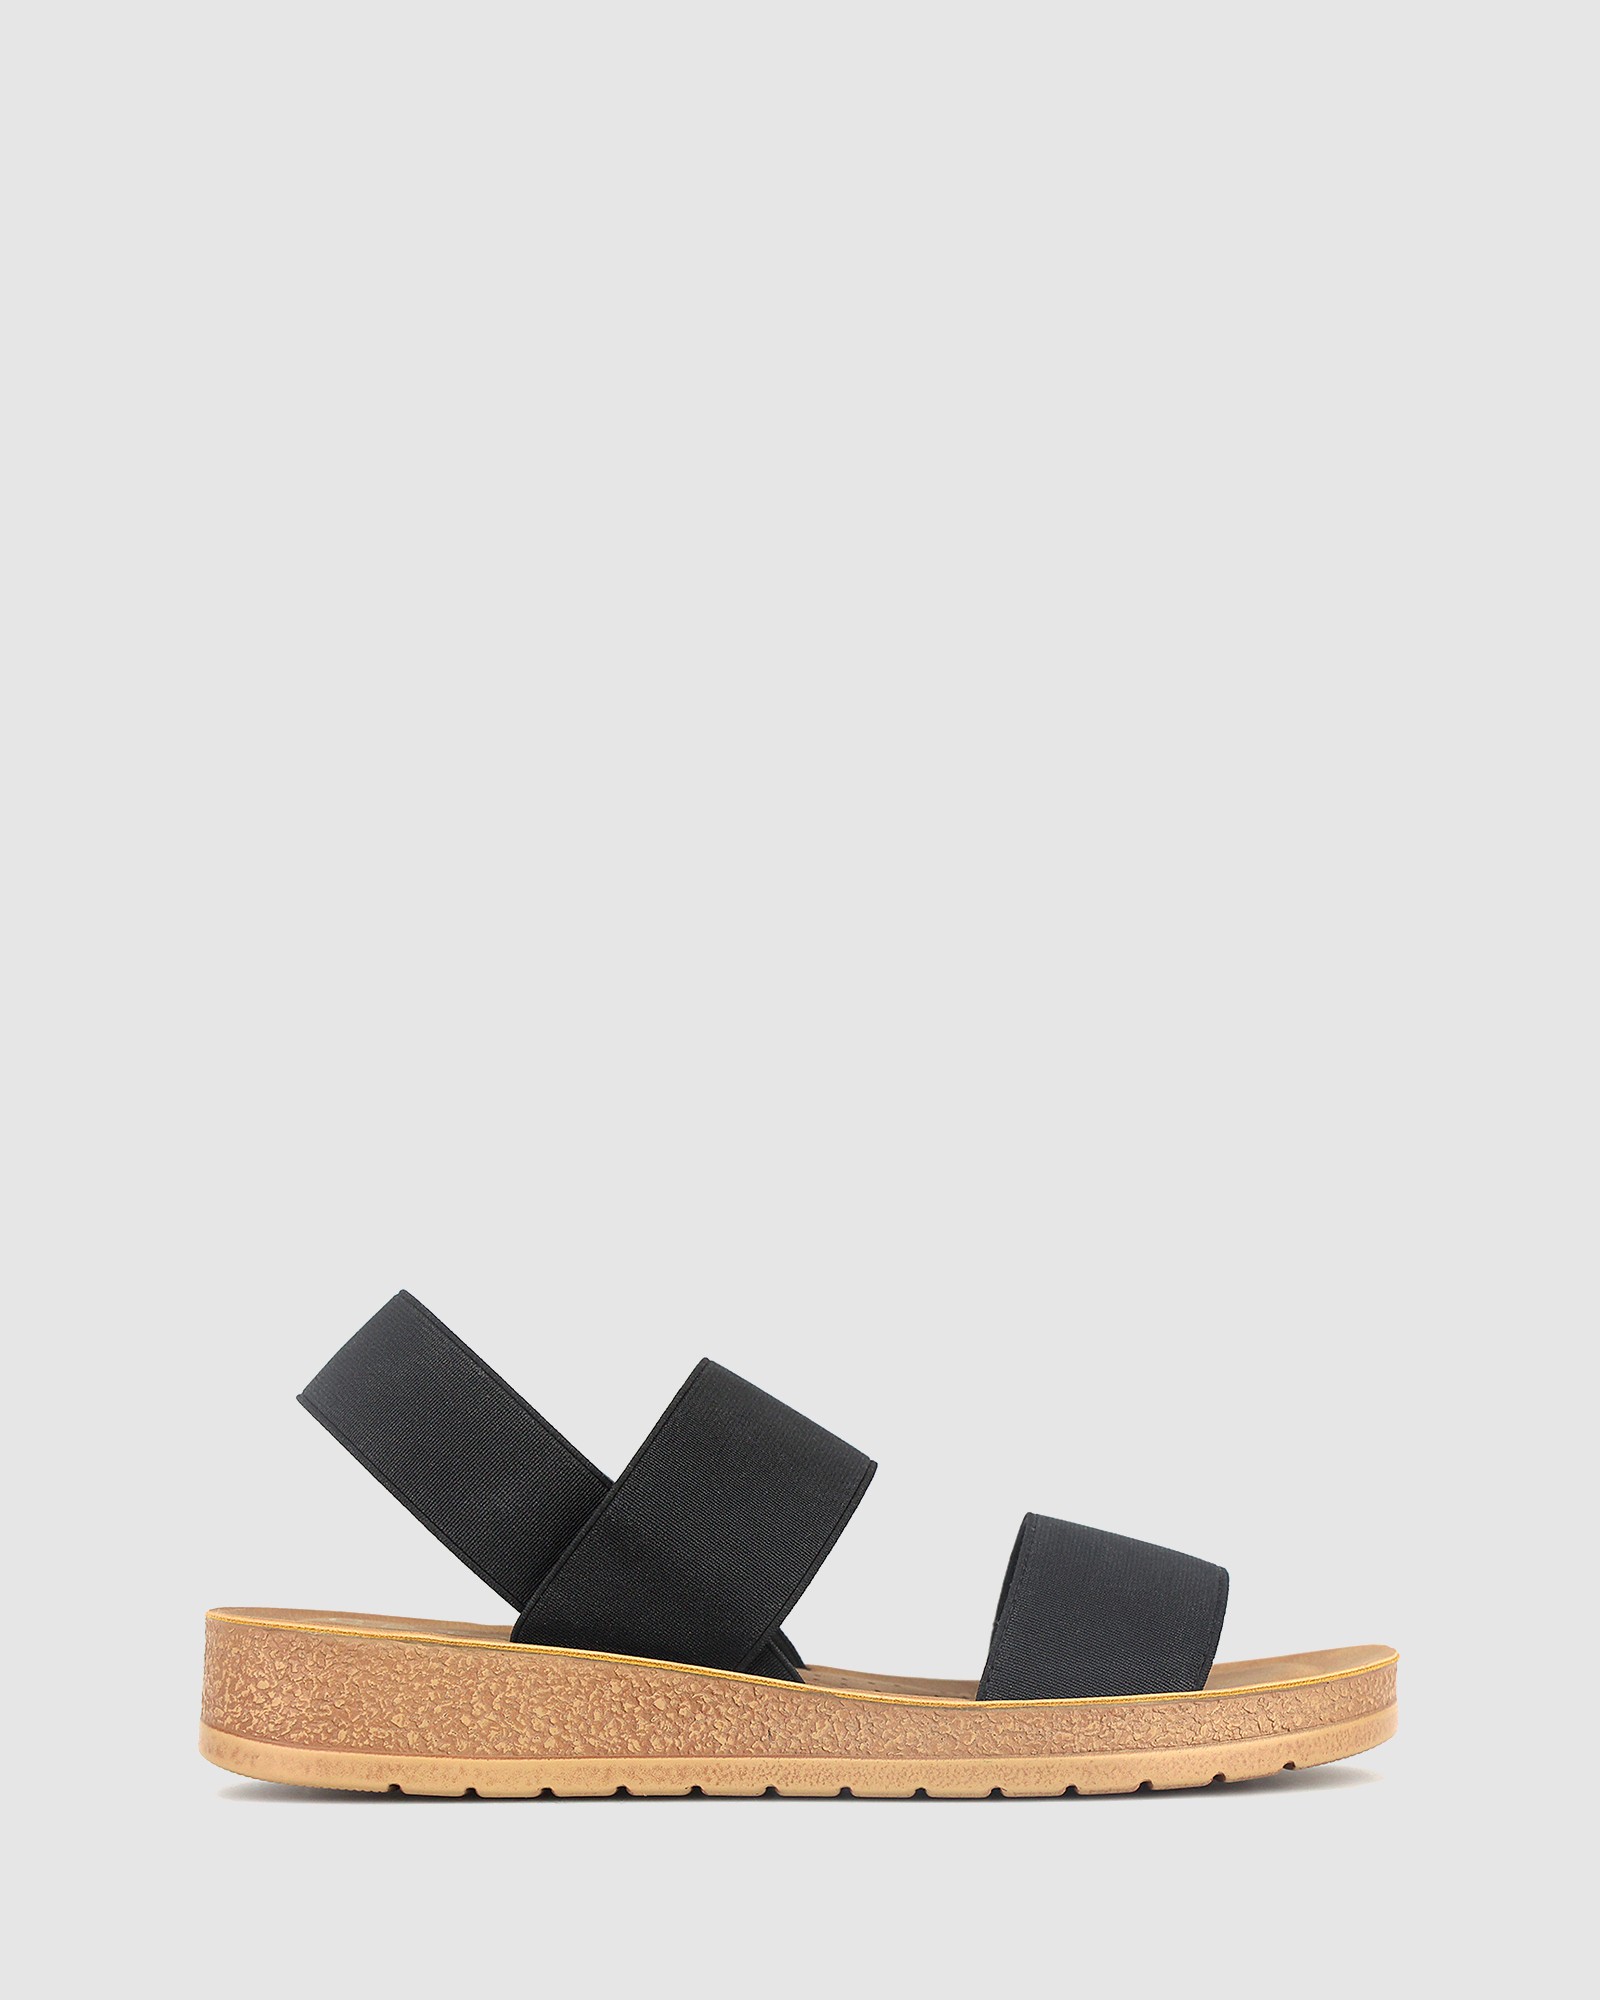 Rise Elastic Low Wedge Sandals Black by Betts | ShoeSales